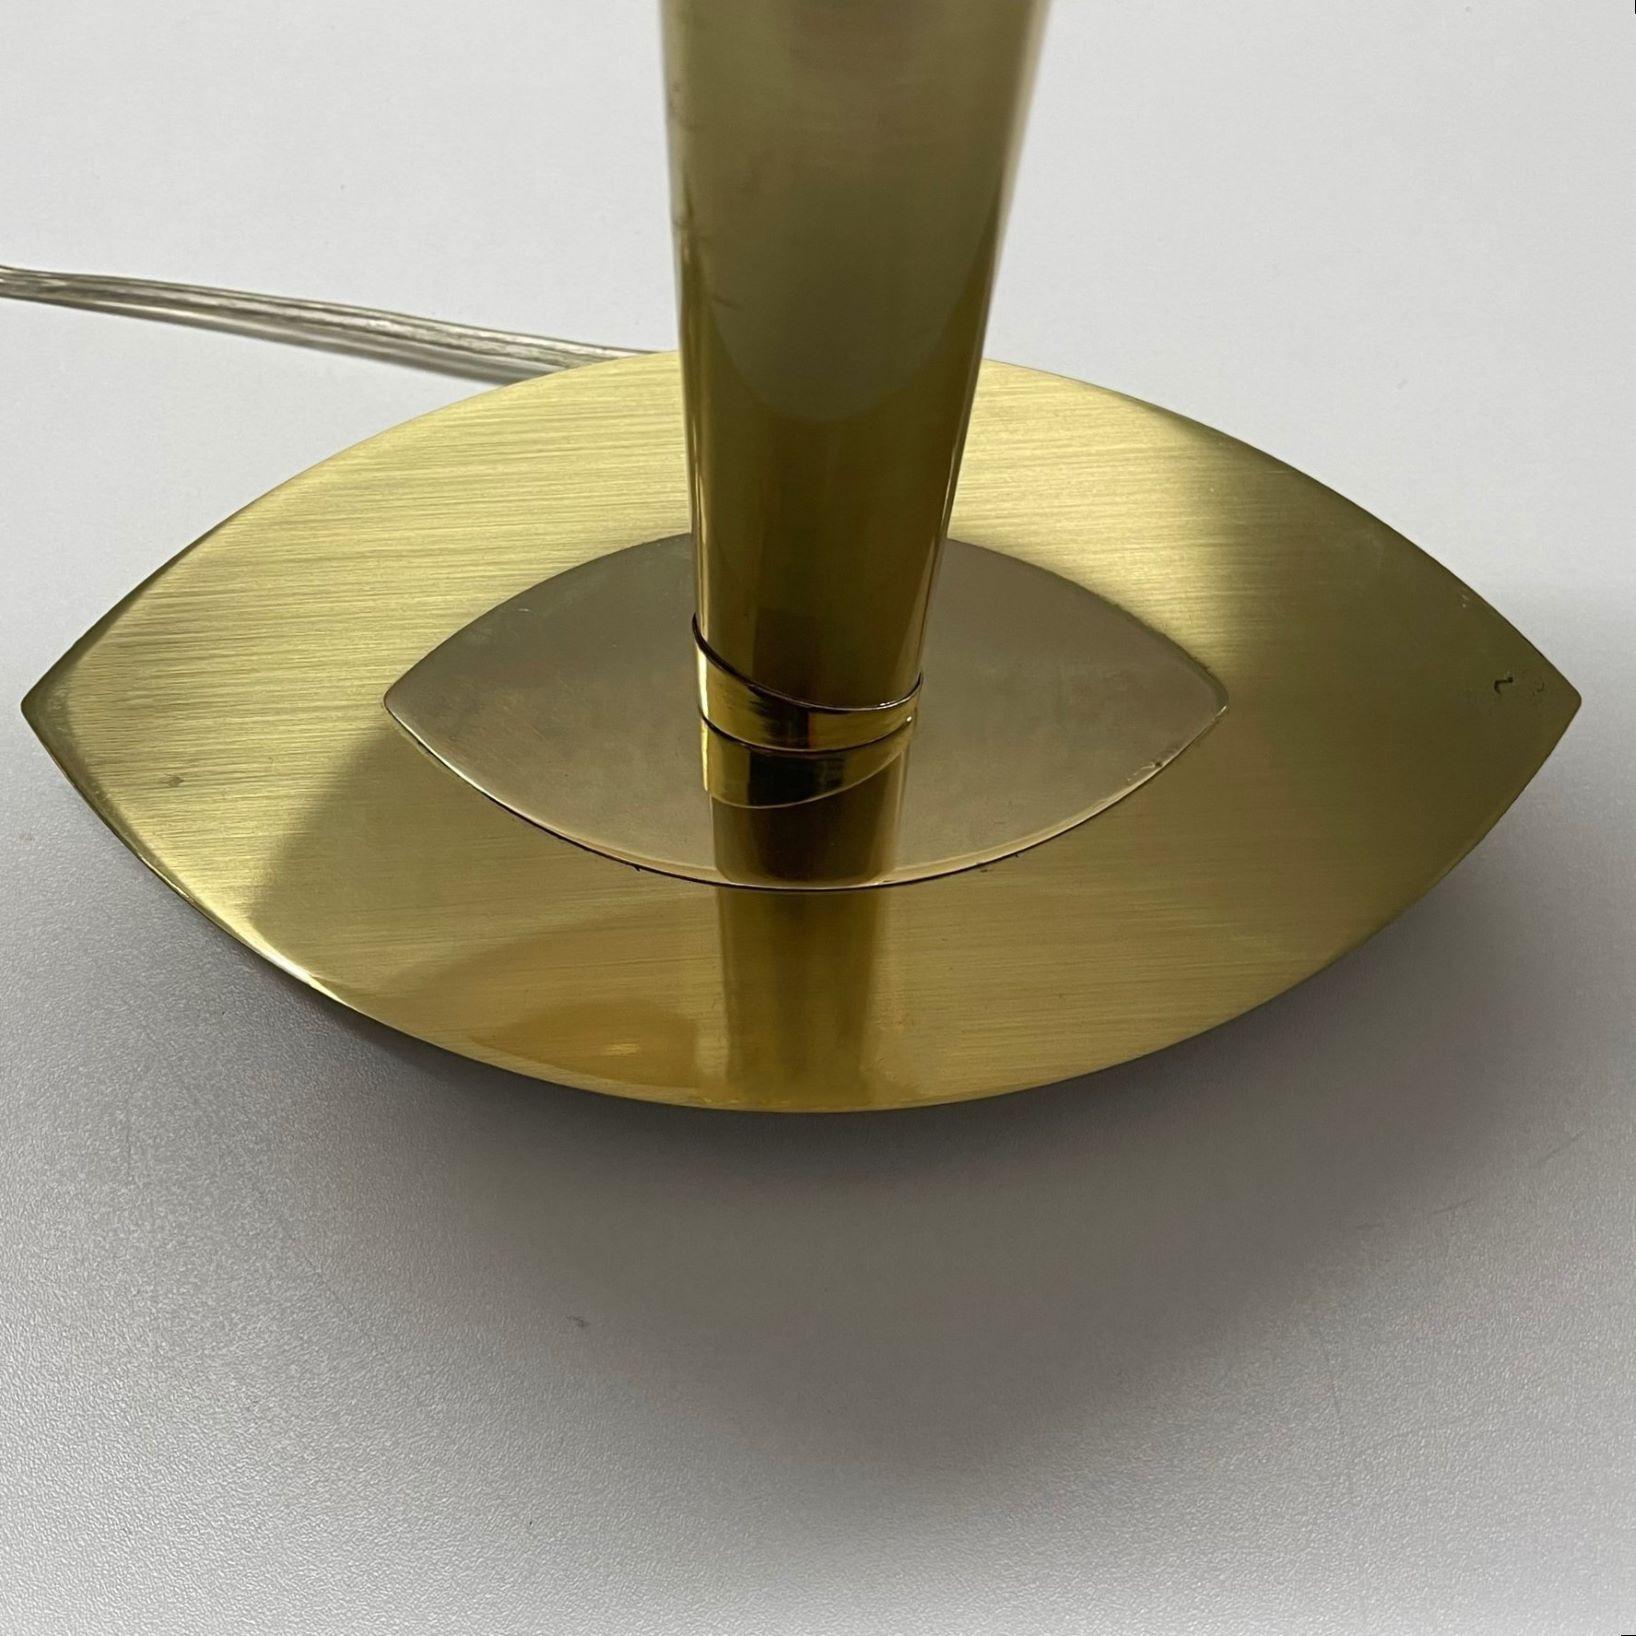 German Bauhaus Chased Brass Satin Glass Two-Light Bankers Desk Lamp Table Lamp, 1960s For Sale